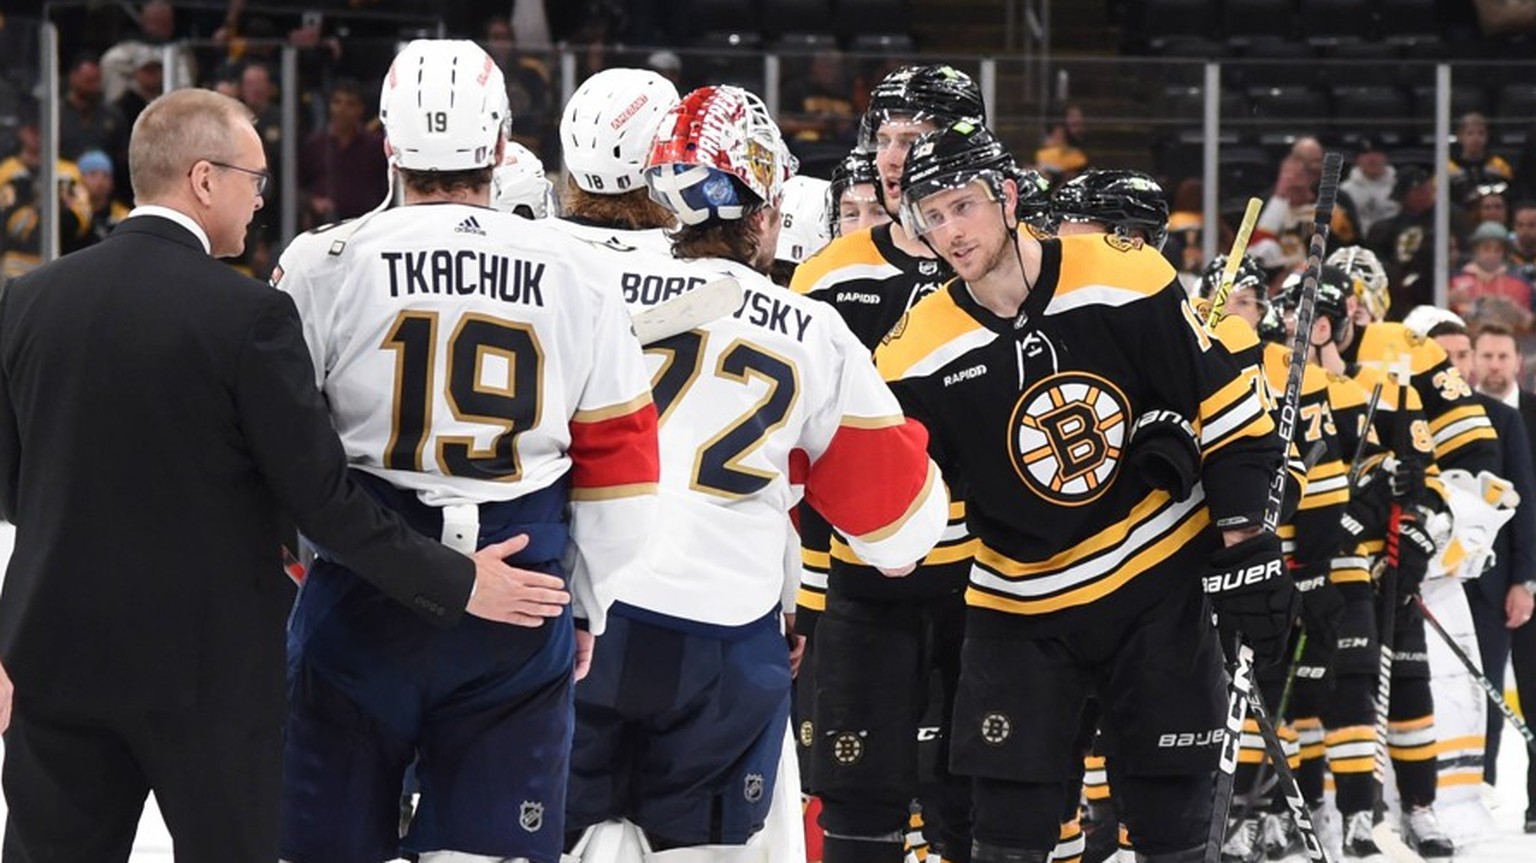 NHL, Eishockey Herren, USA Stanley Cup Playoffs-Florida Panthers at Boston Bruins Apr 30, 2023 Boston, Massachusetts, USA The Florida Panthers and Boston Bruins shake hands after the Panthers defeated ...